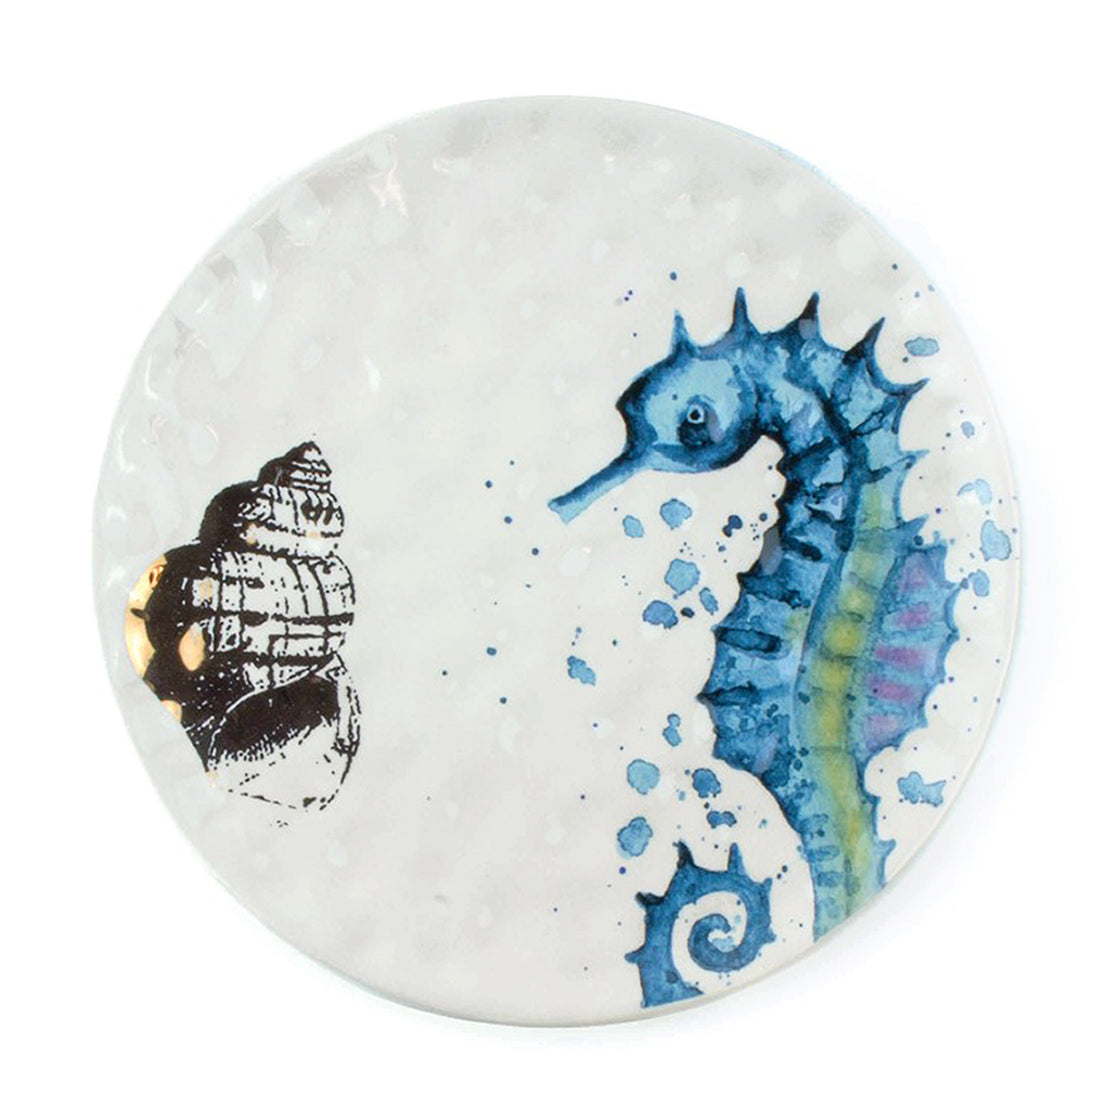 8" decorative seahorse plate with gold shell